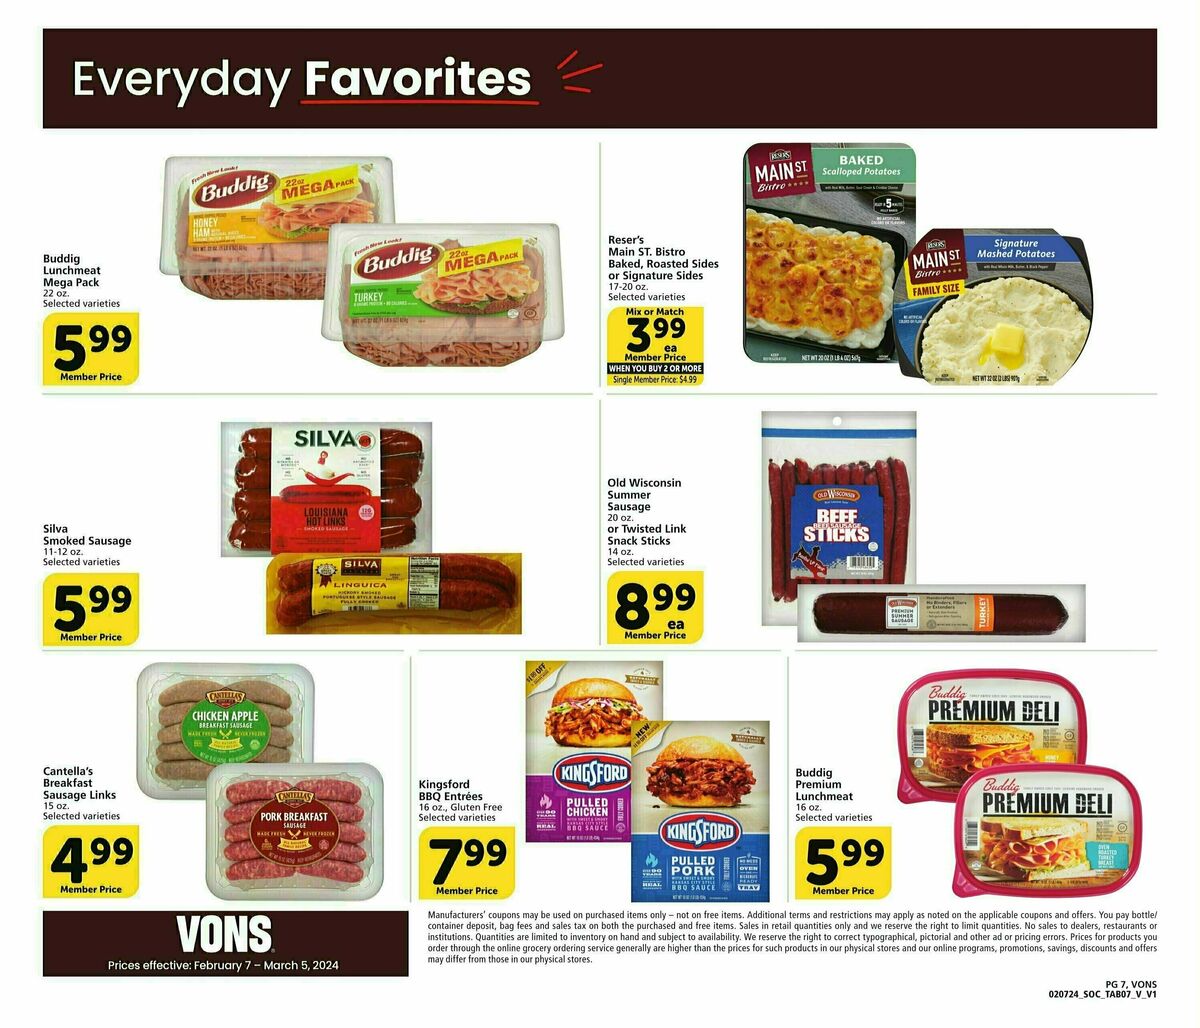 Vons Big Book of Savings Weekly Ad from February 7